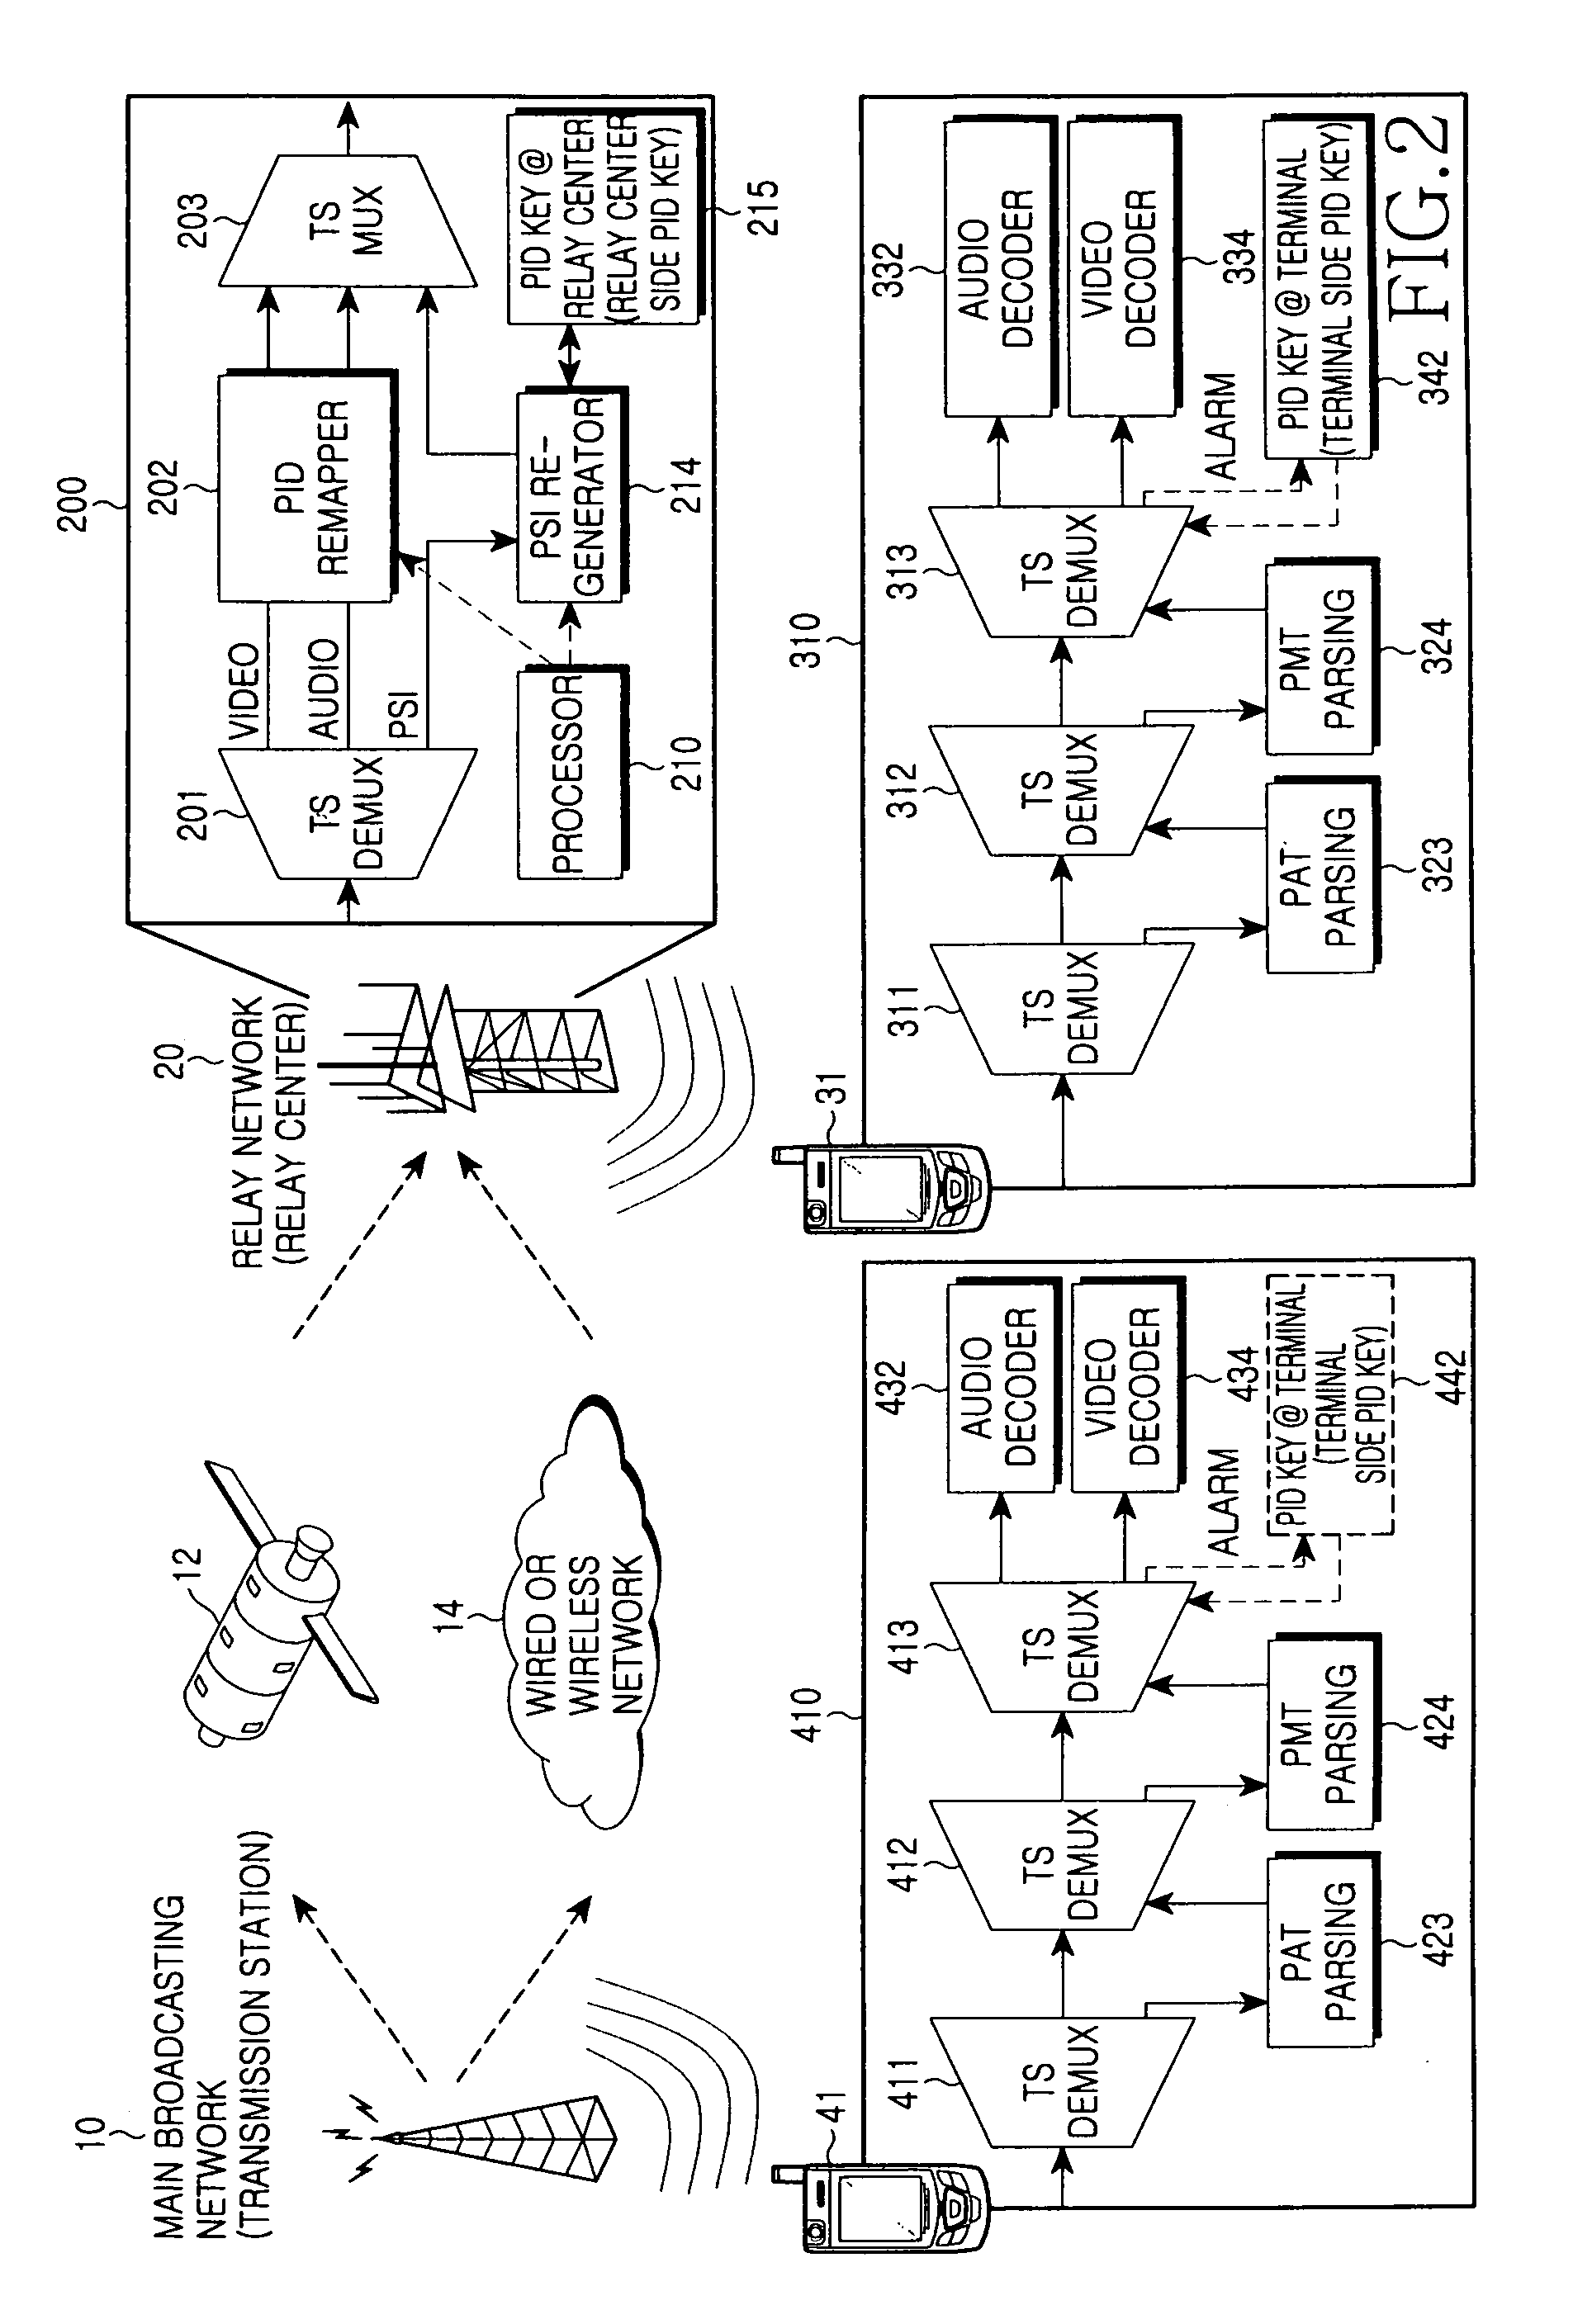 System and method for digital multimedia broadcasting confinement service